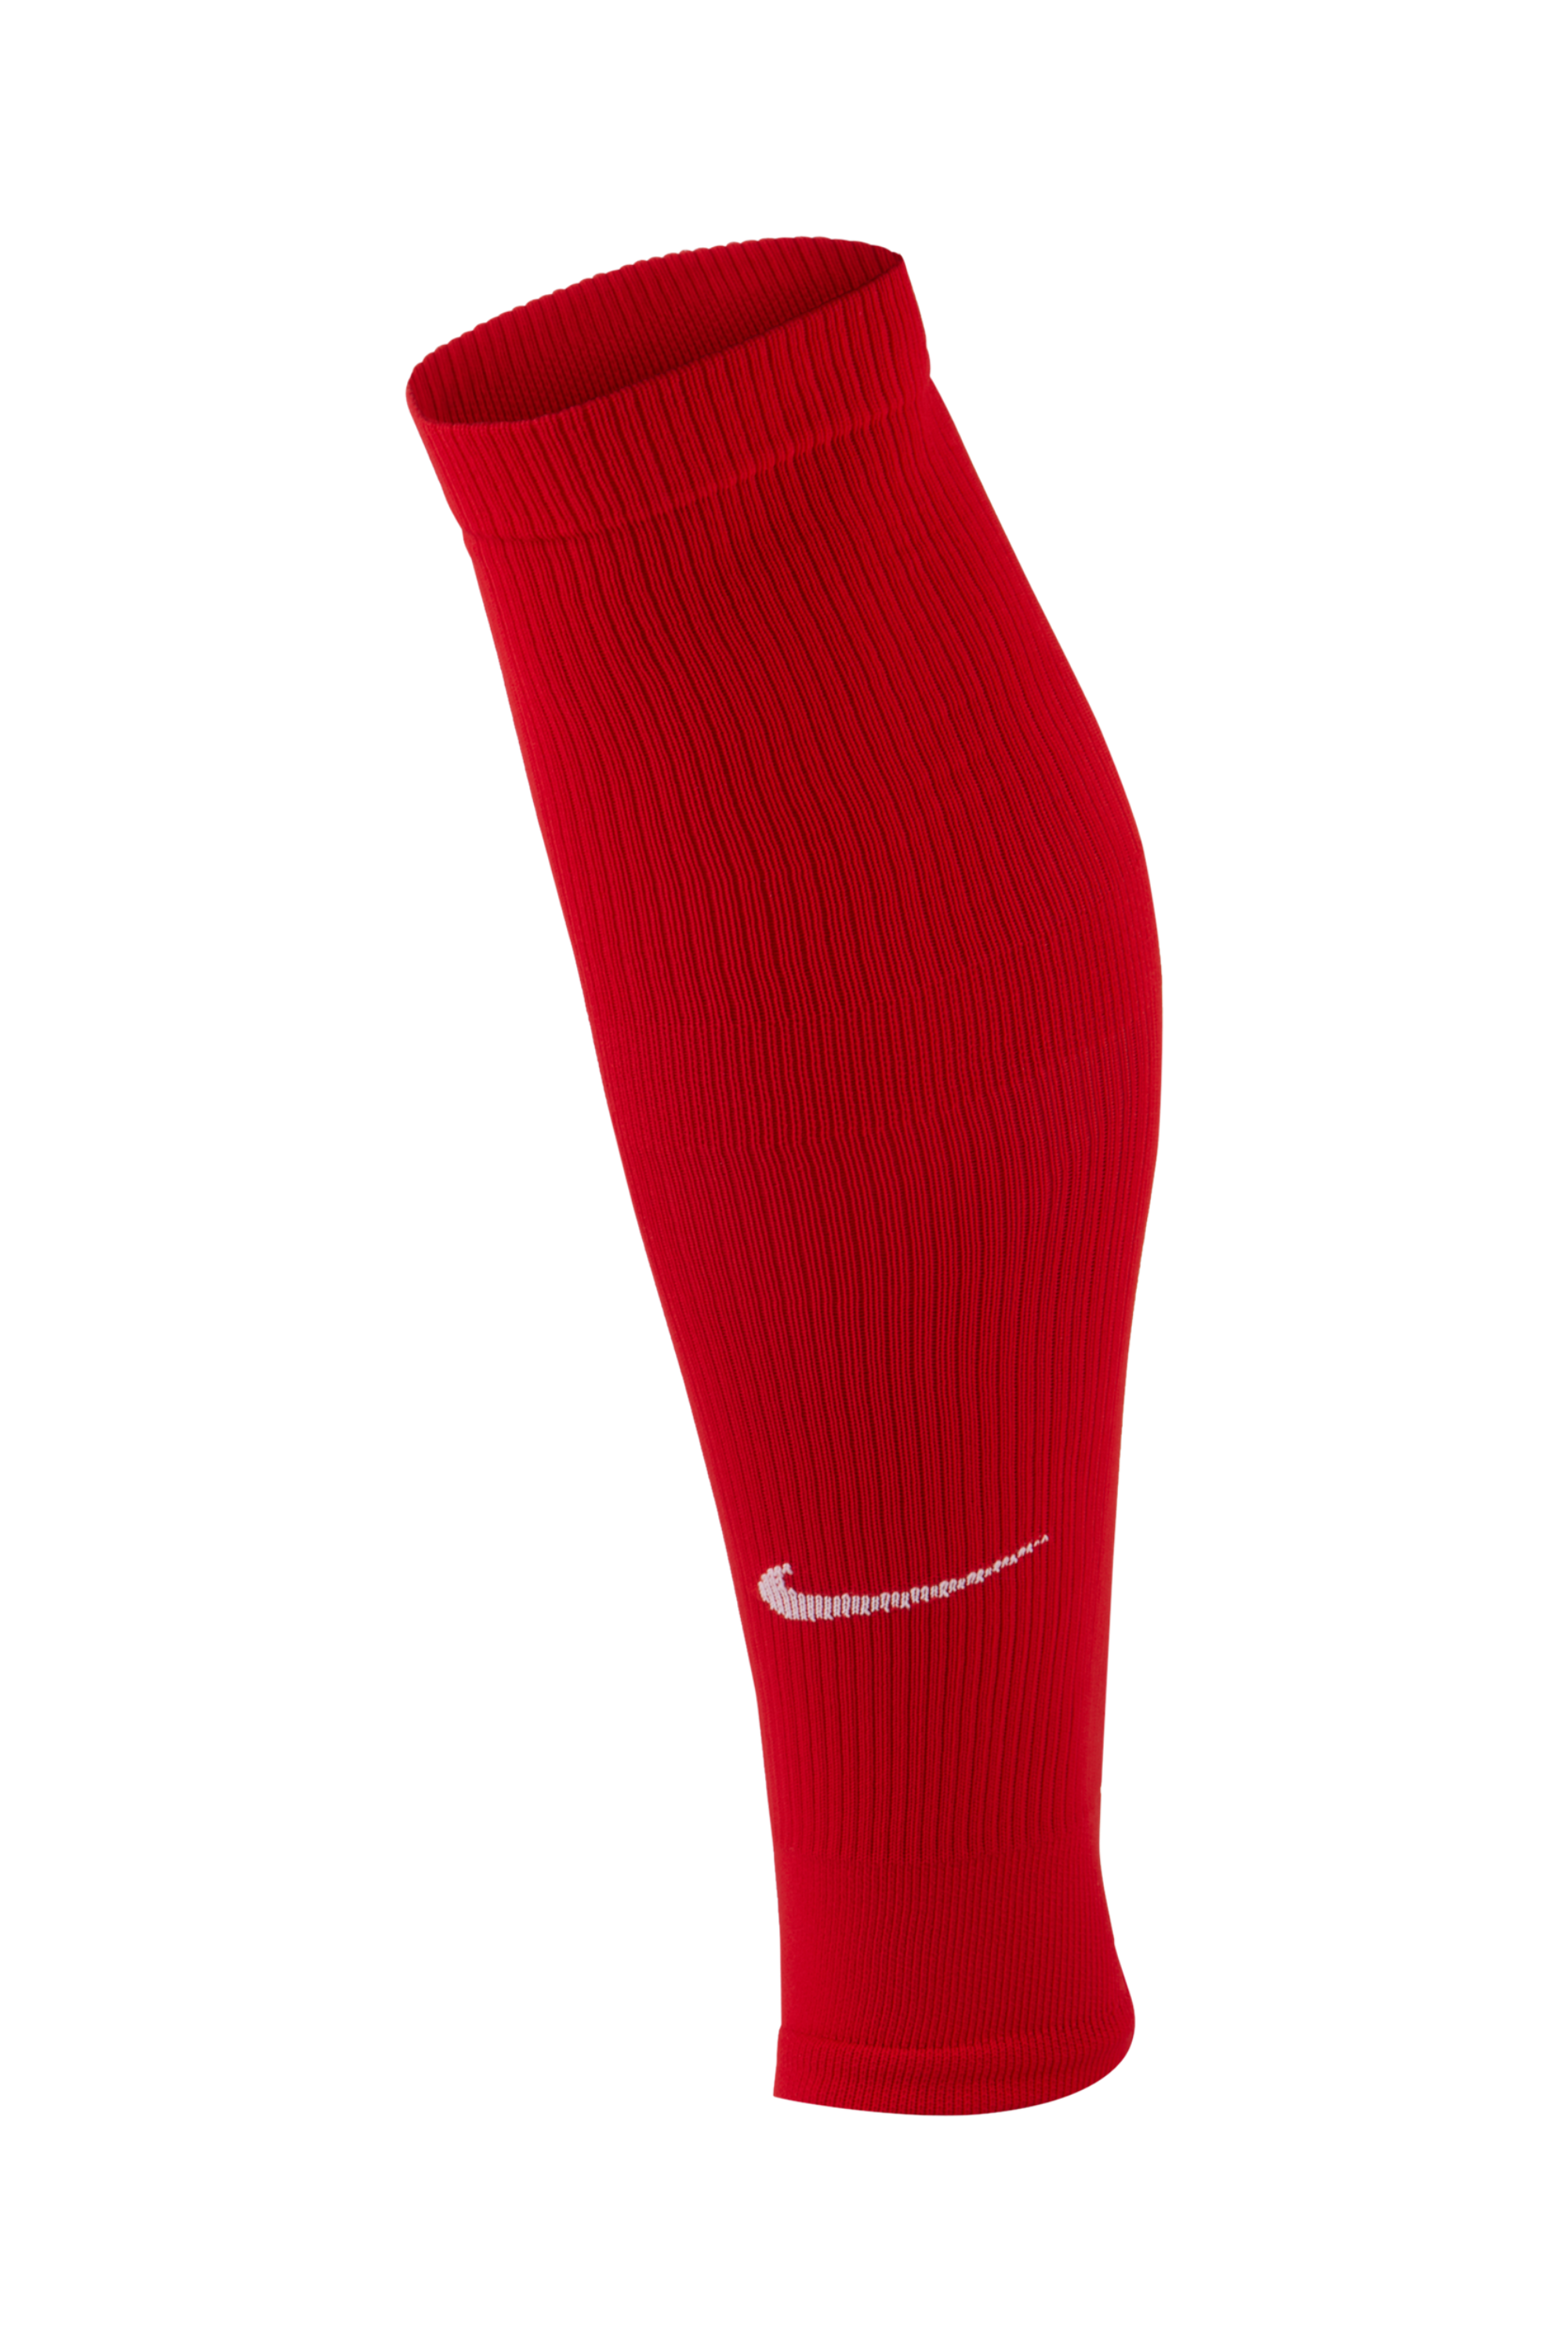 https://gfx.r-gol.com/media/res/products/644/132644/getry-nike-squad-leg-sleeve_1.png